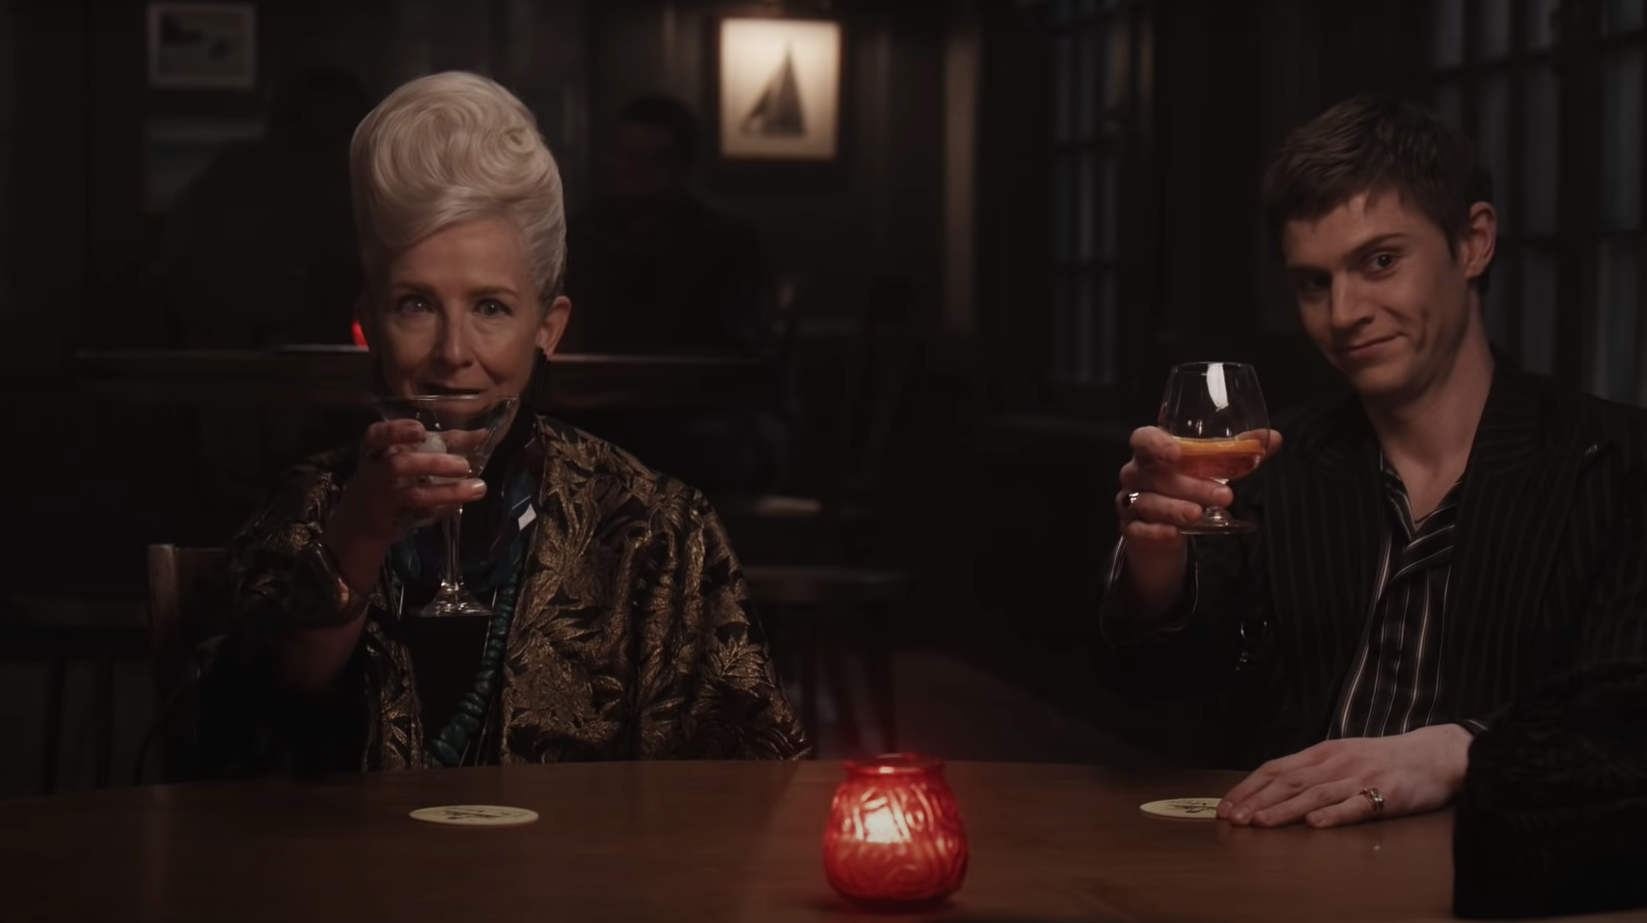 Great art demands pain in the first trailer for American Horror Story: Double Feature